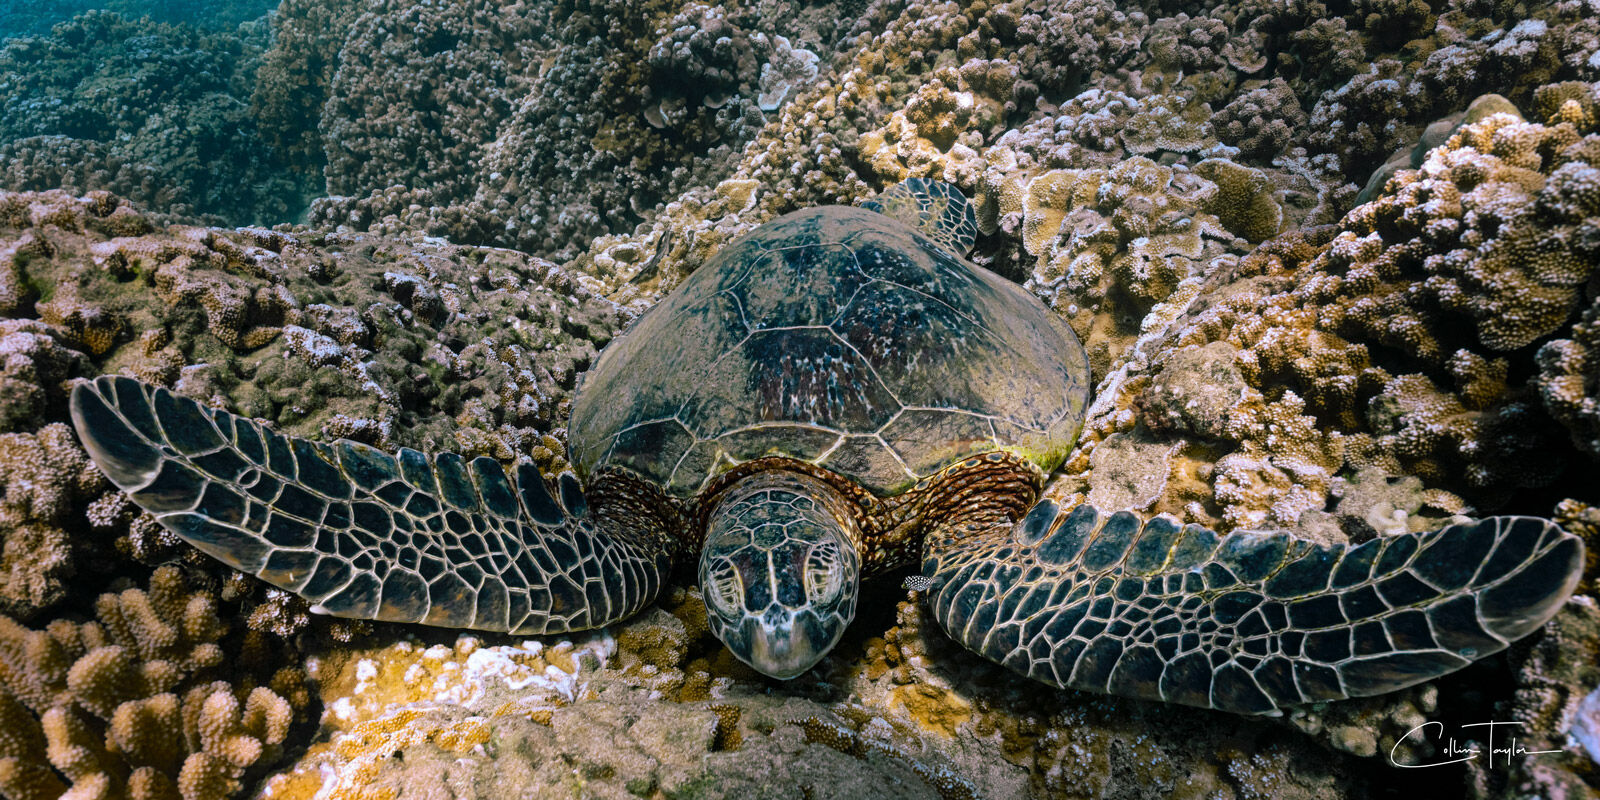 A sea turtle rests 20ft below the oceans surface among the reef and fish.